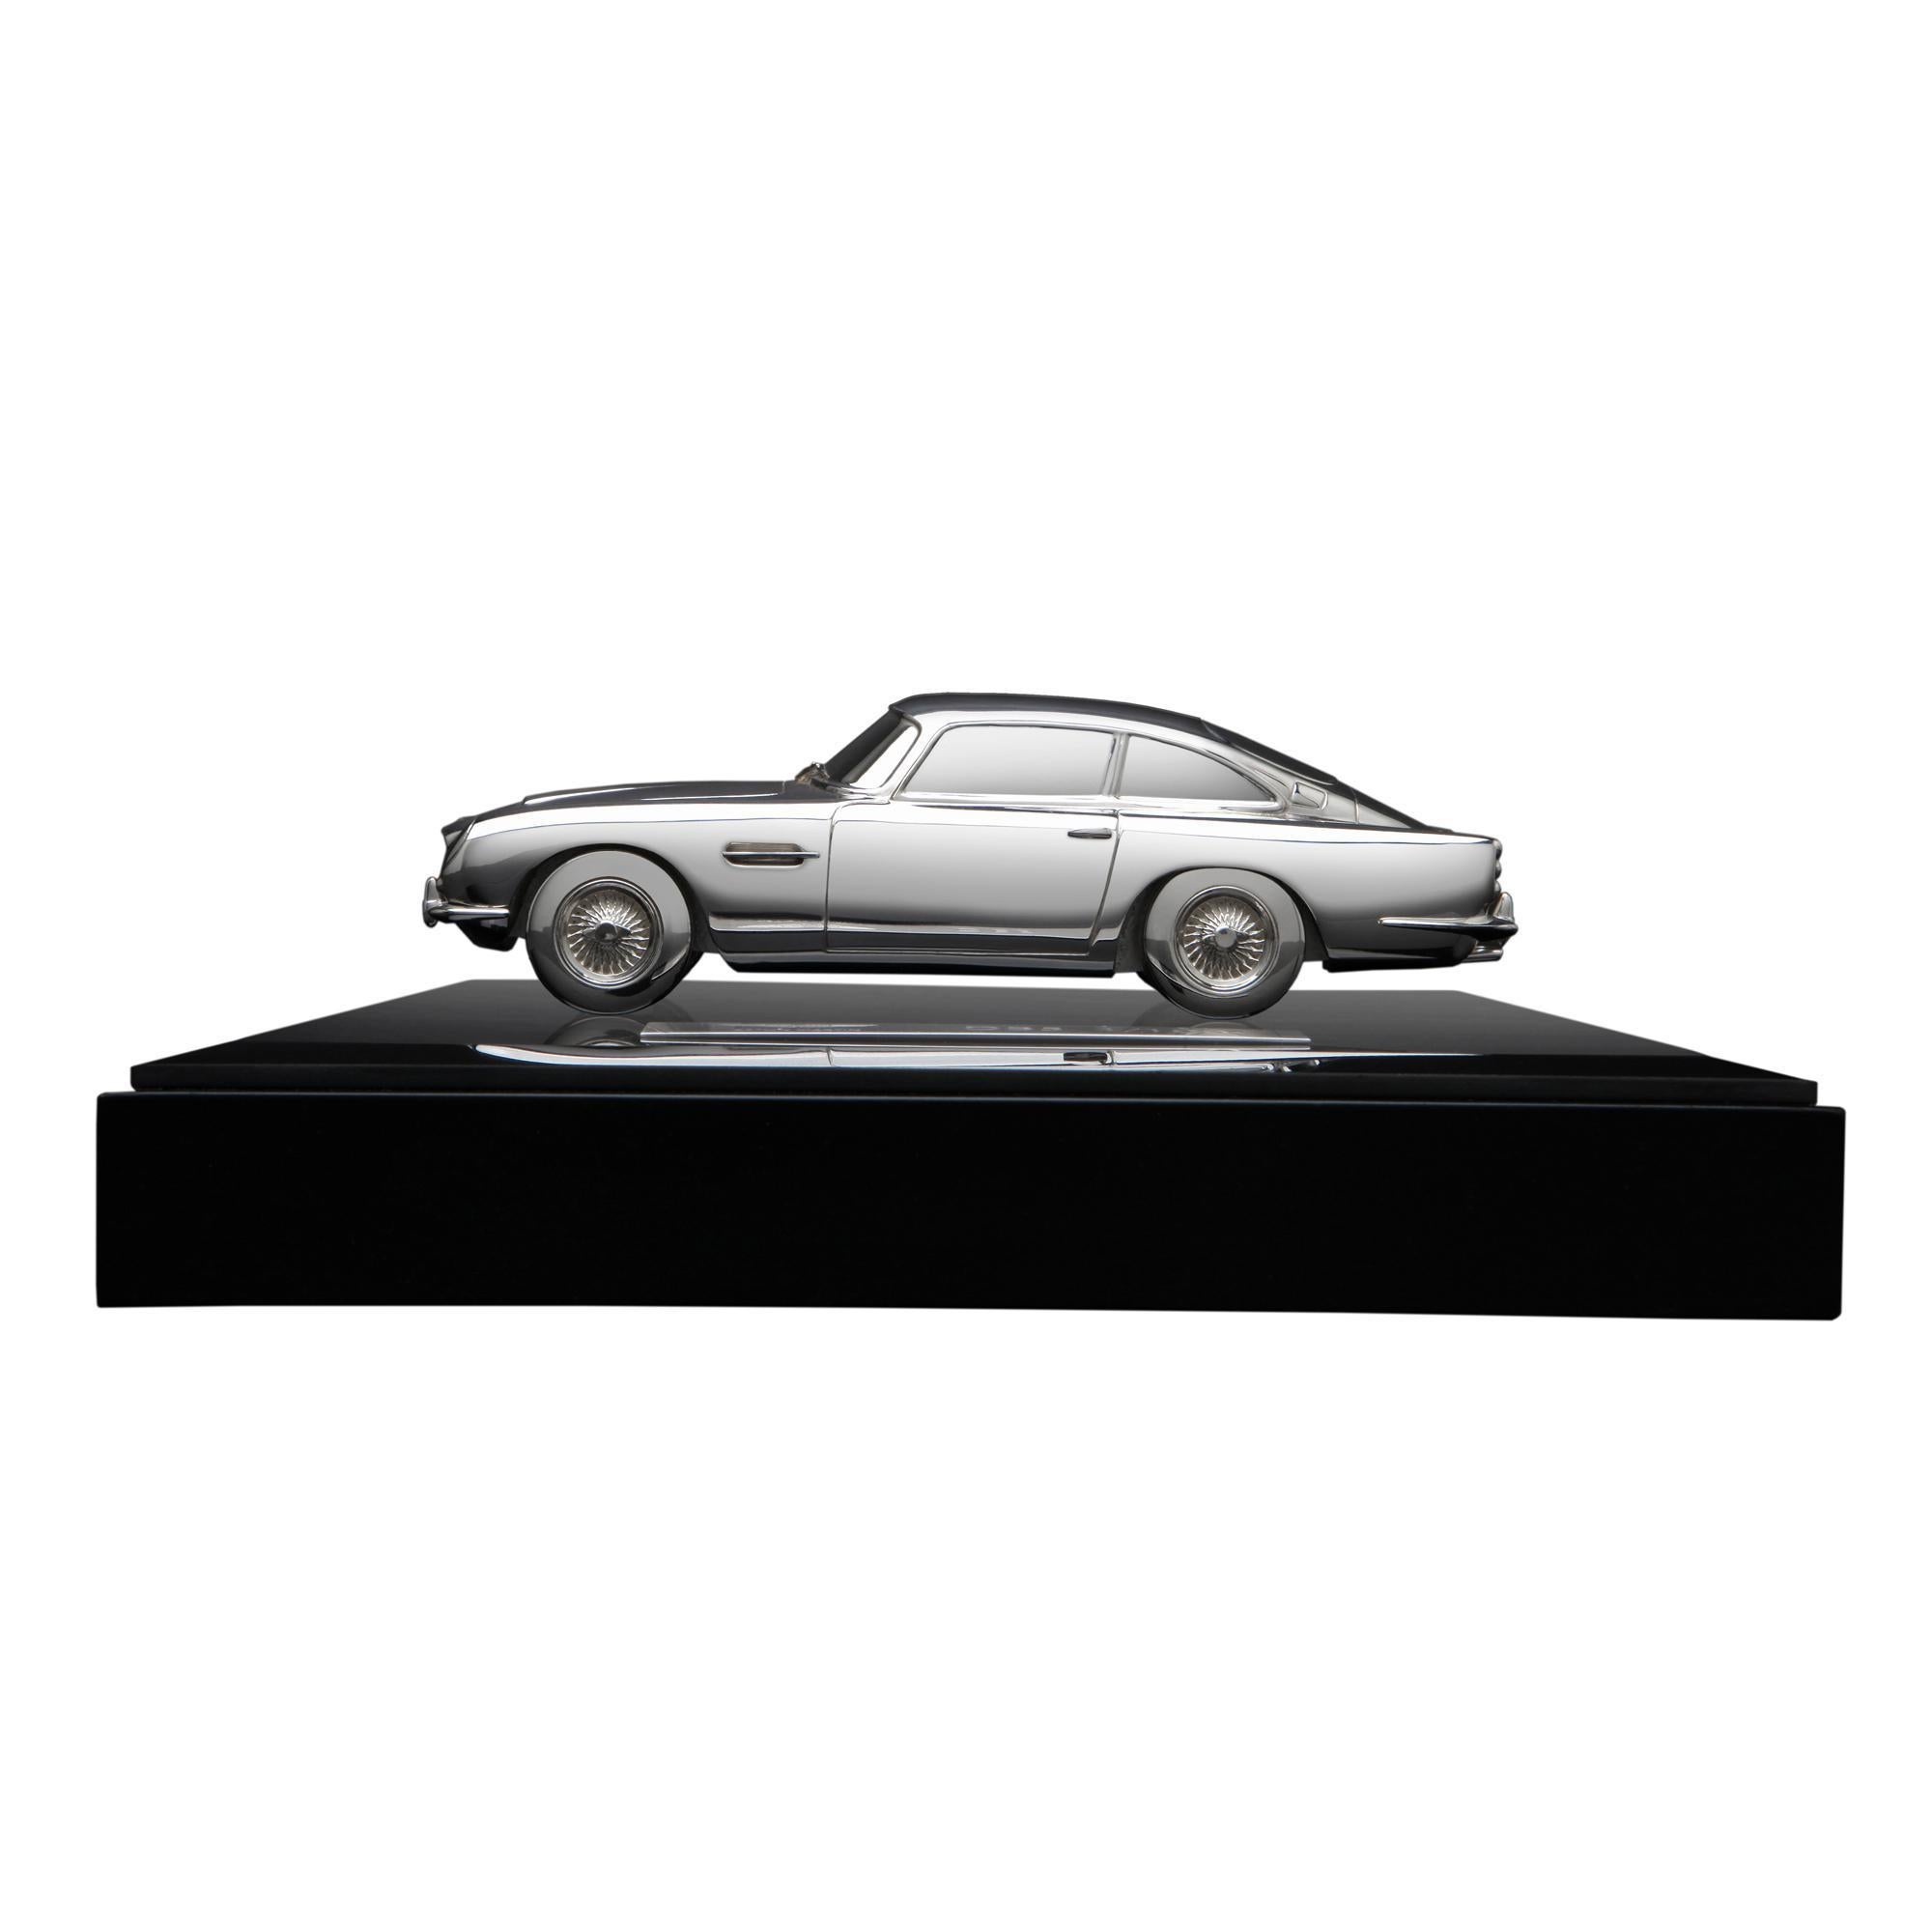 A perfect replica of the iconic DB5, handcrafted in London in hallmarked sterling silver and presented on a wood and glass plinth. This precise 1:30 scale model of Aston Martin's 1963 sports car, is a limited edition of 100 pieces and carries the